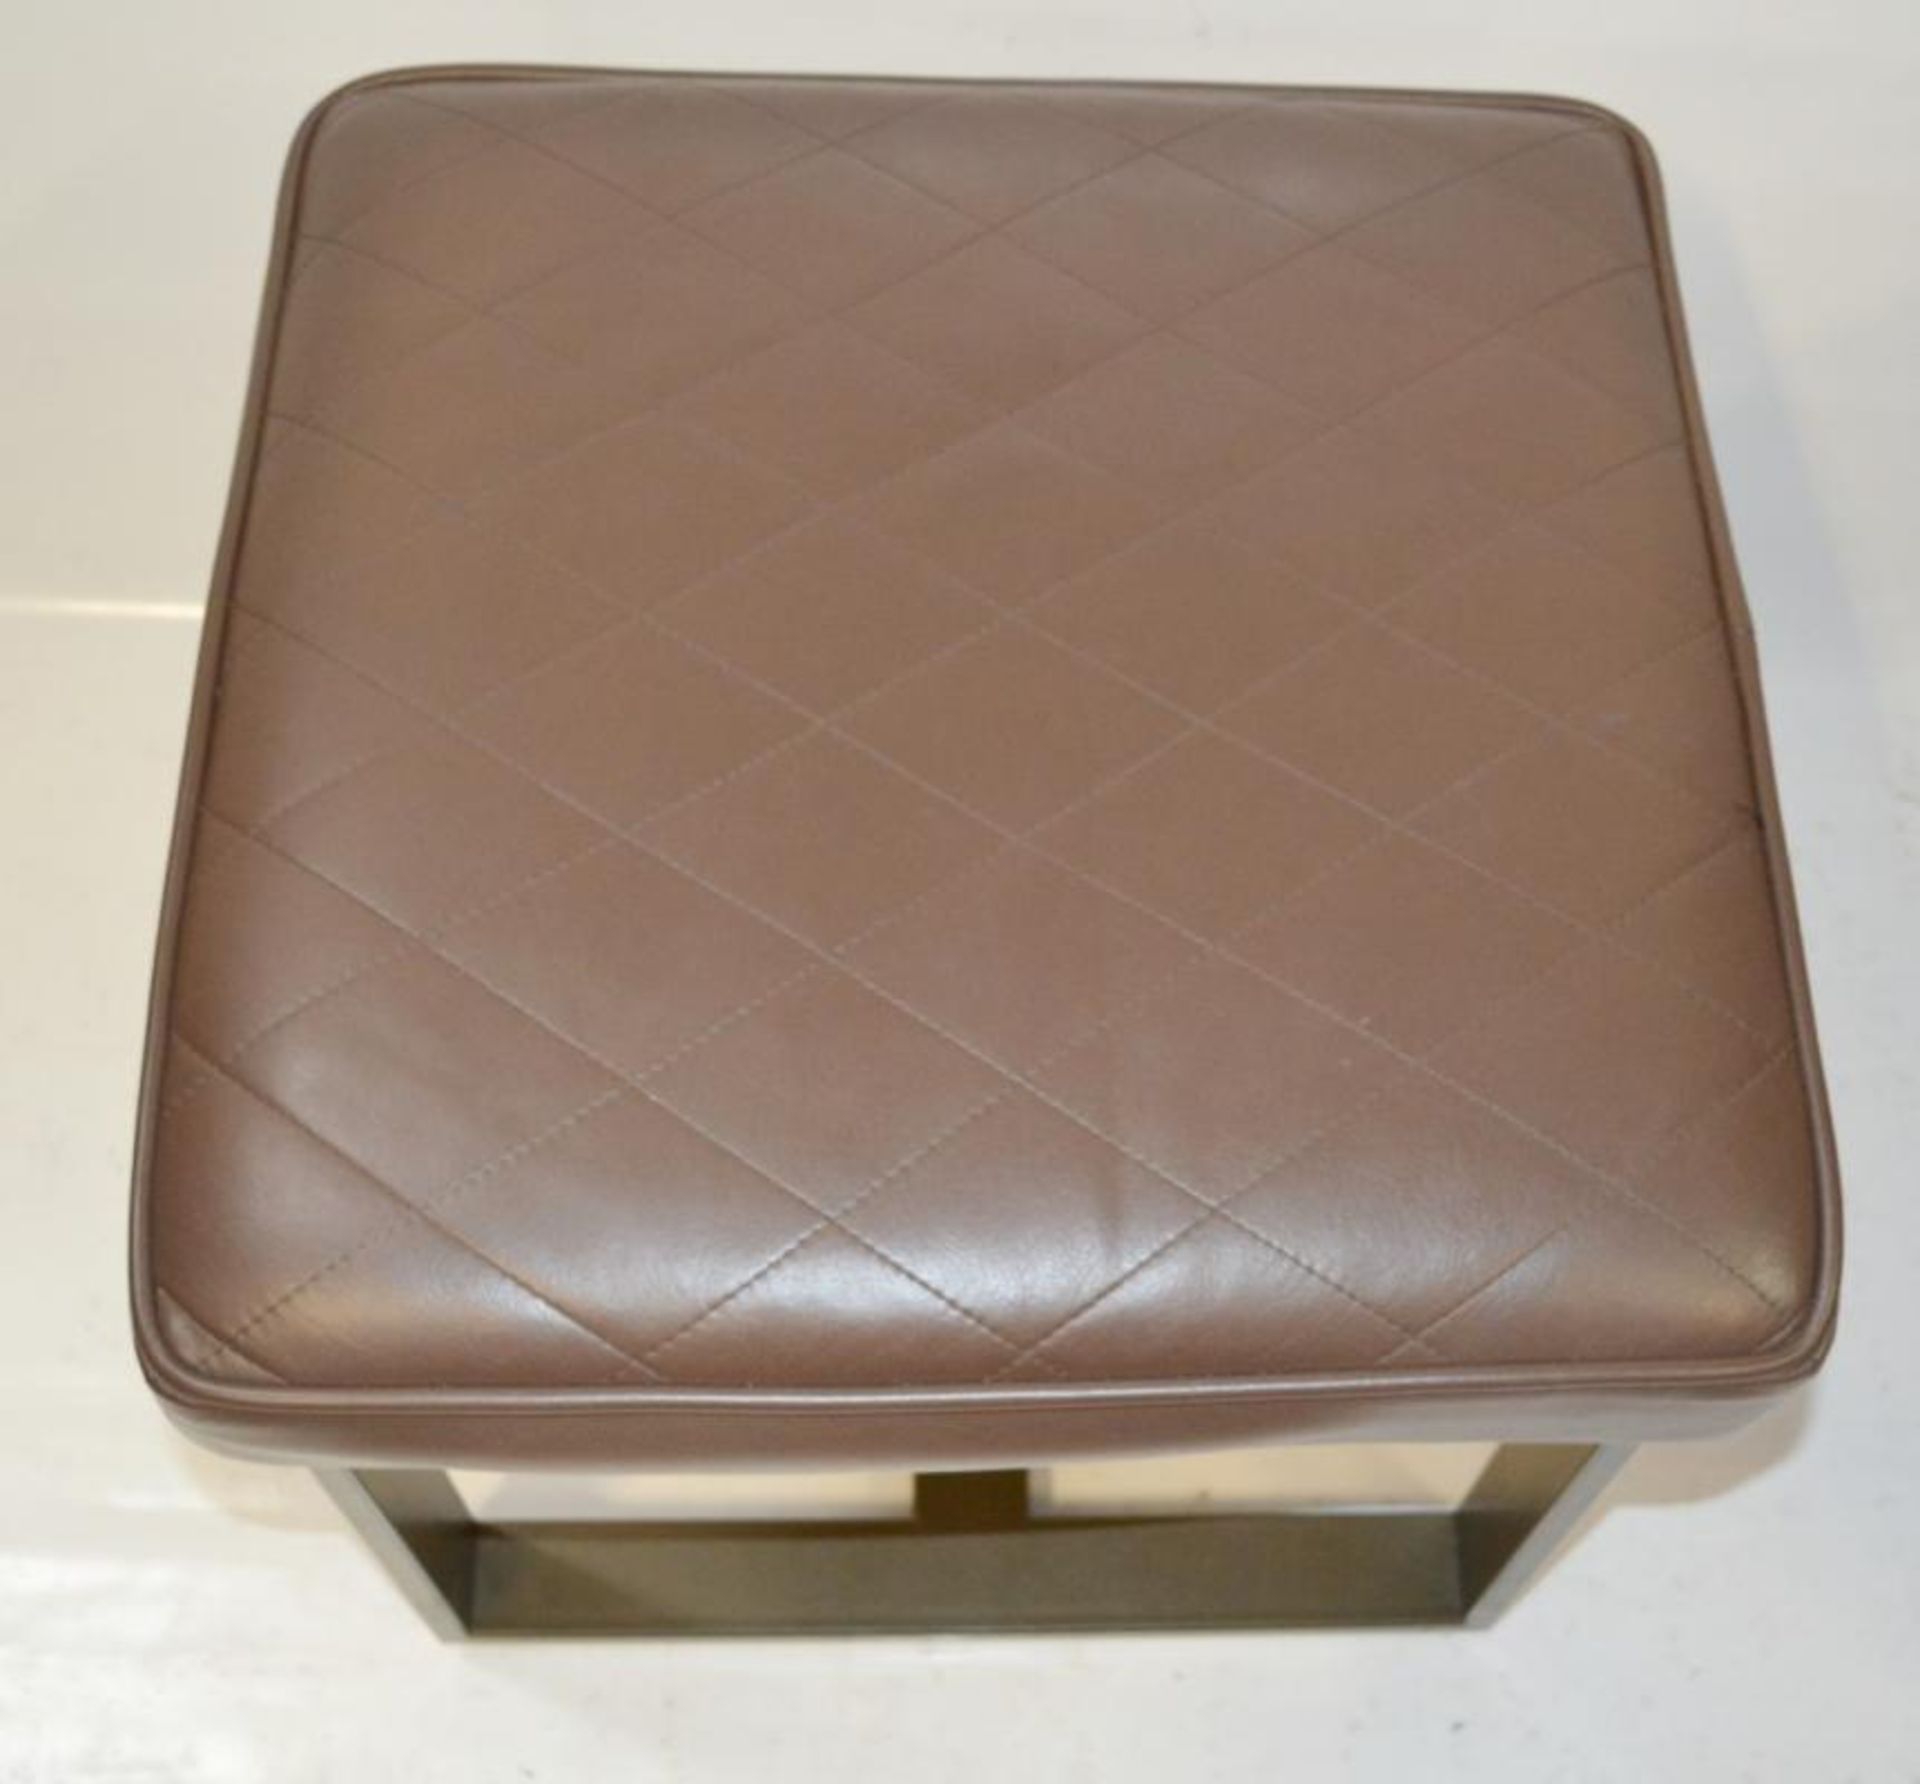 8 x Contemporary Seat Stools With Brown Faux Leather Cushioned Seat Pads - Recently Removed From - Image 6 of 6